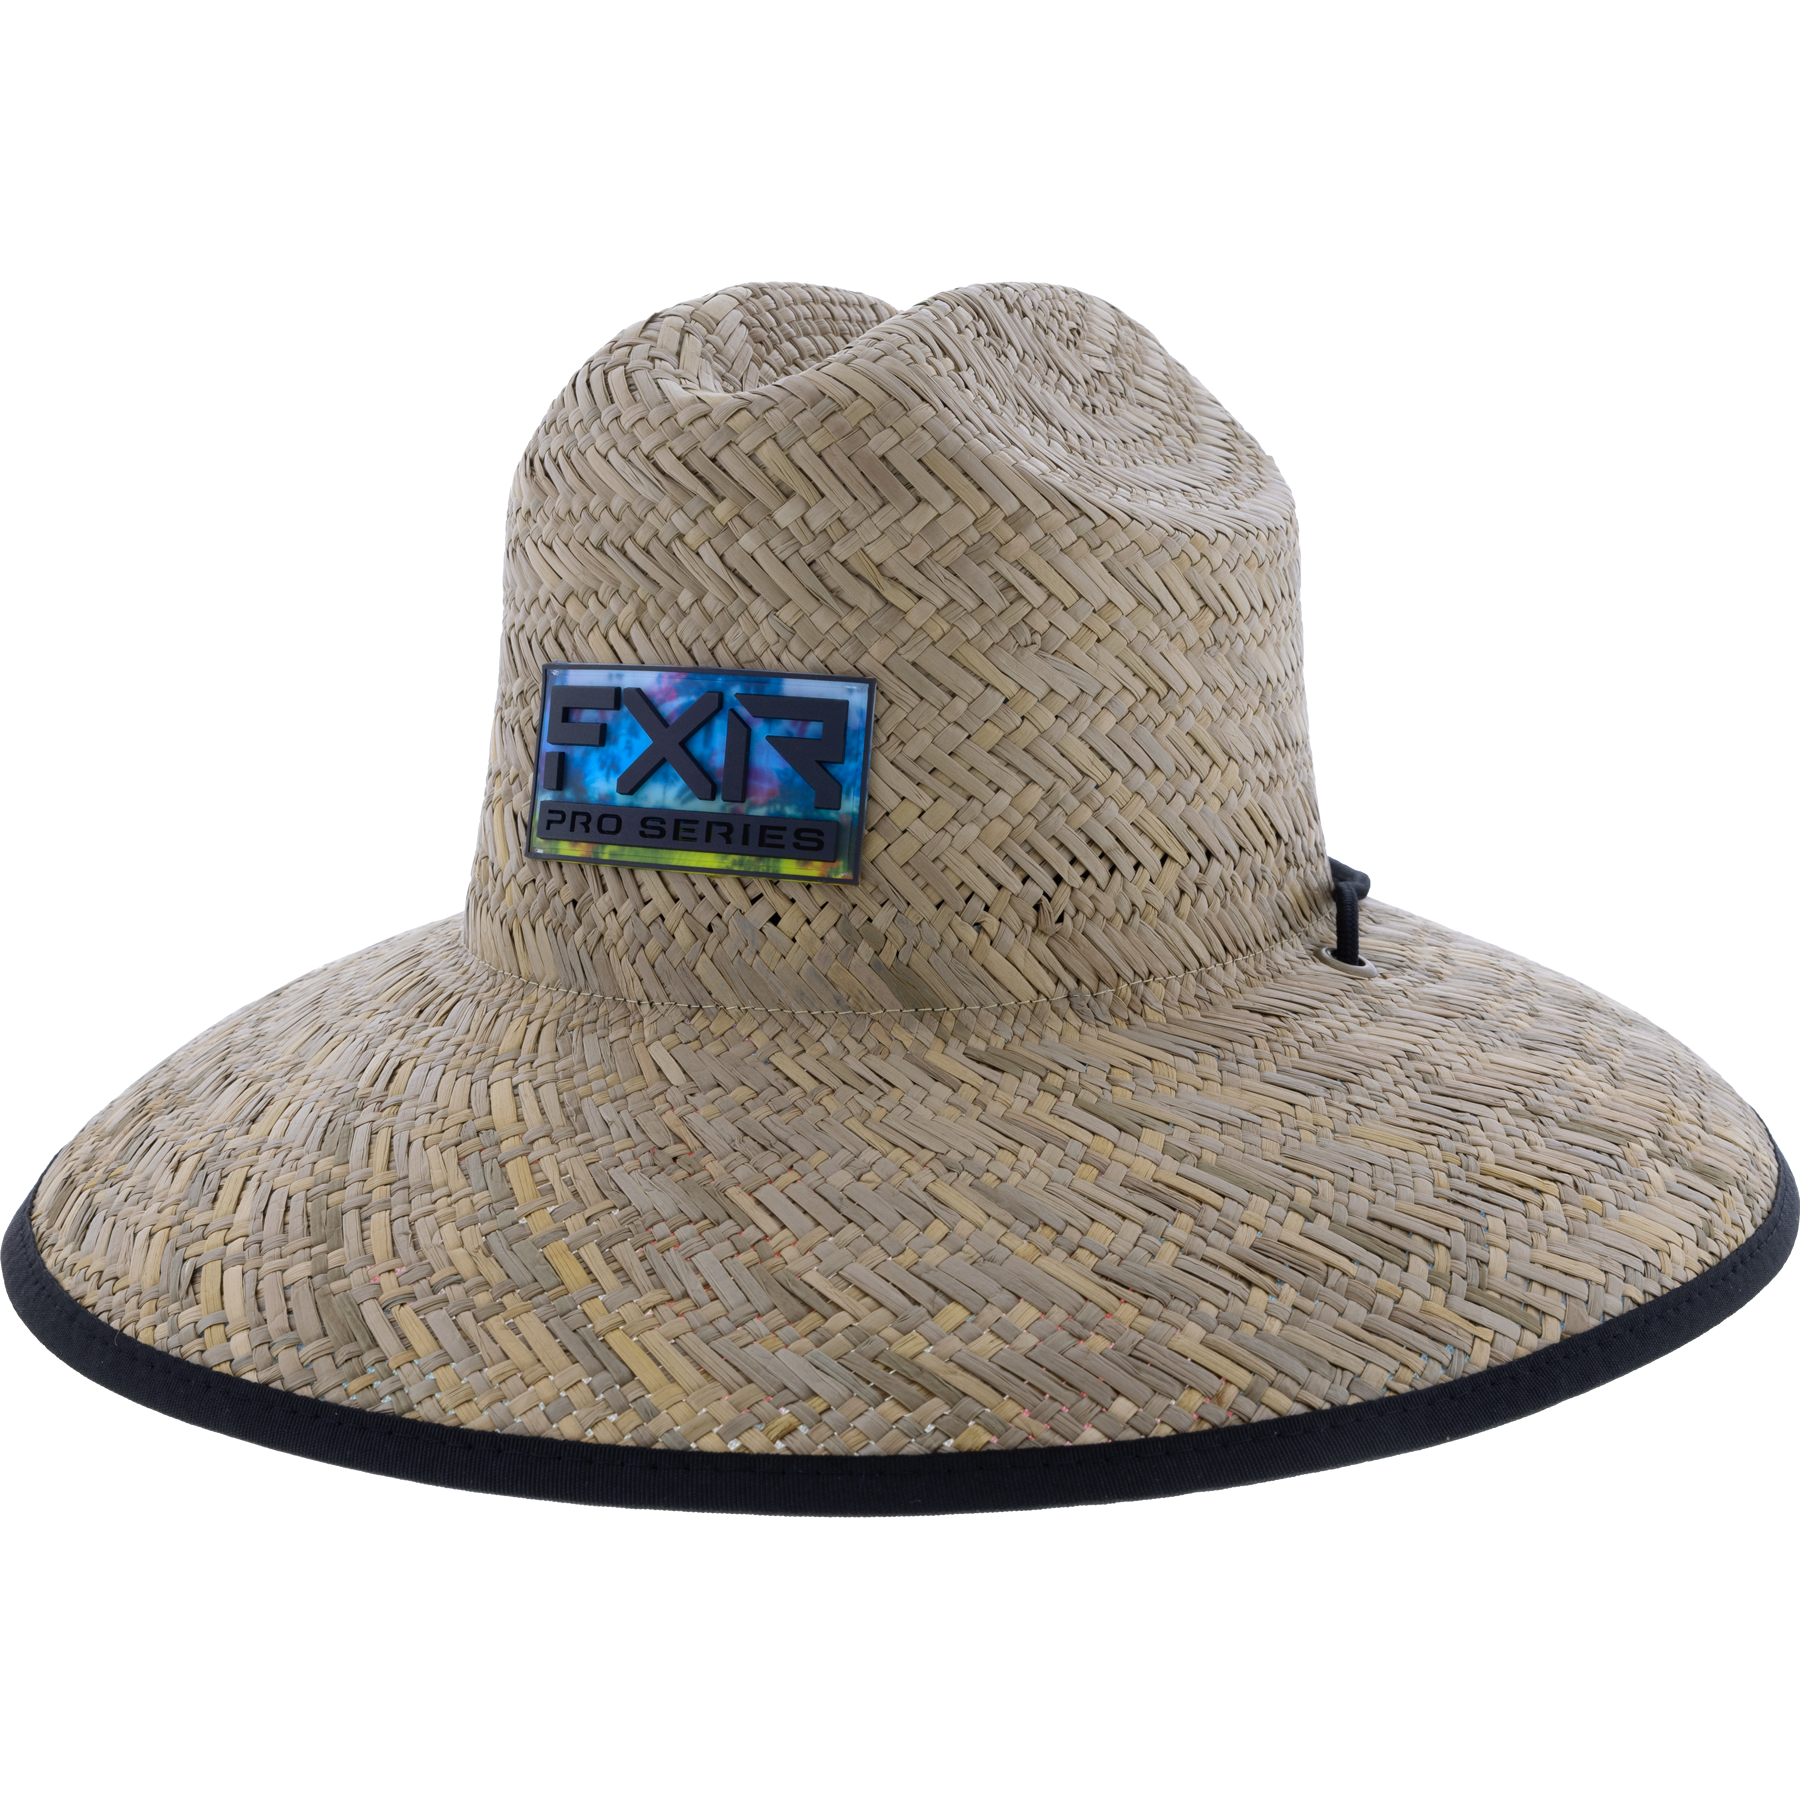 FXR Shoreside YOUTH Straw Hat Tropical